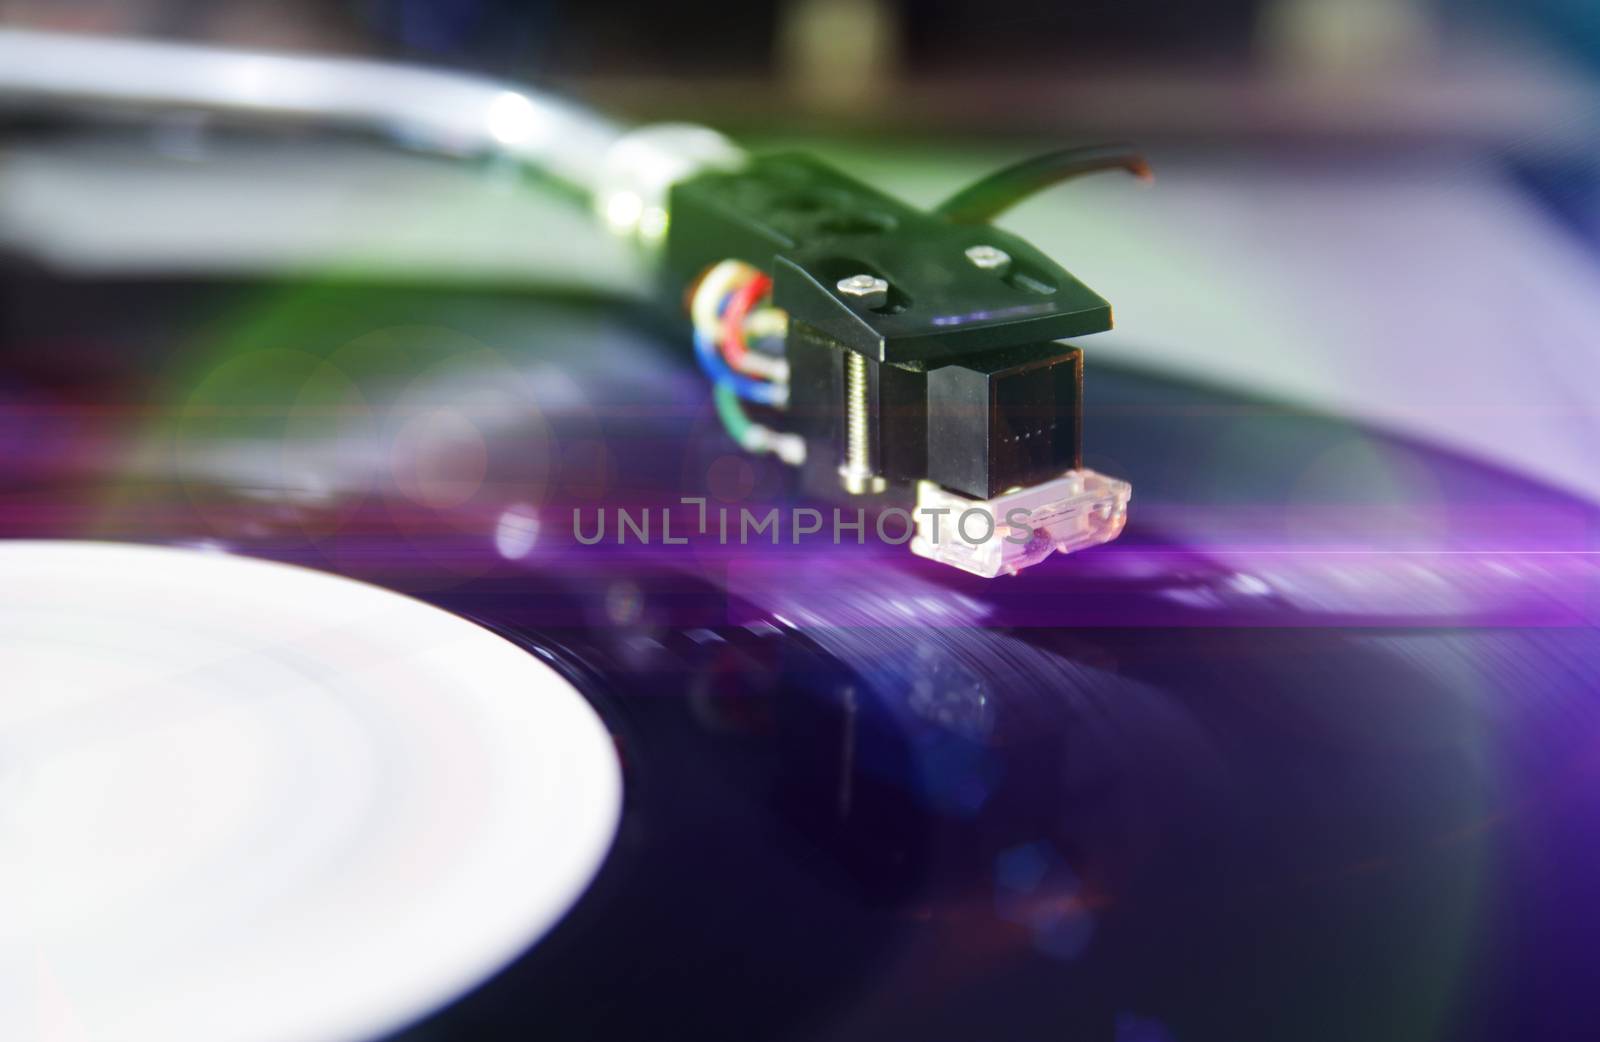 a blurry background with turntable and light effects